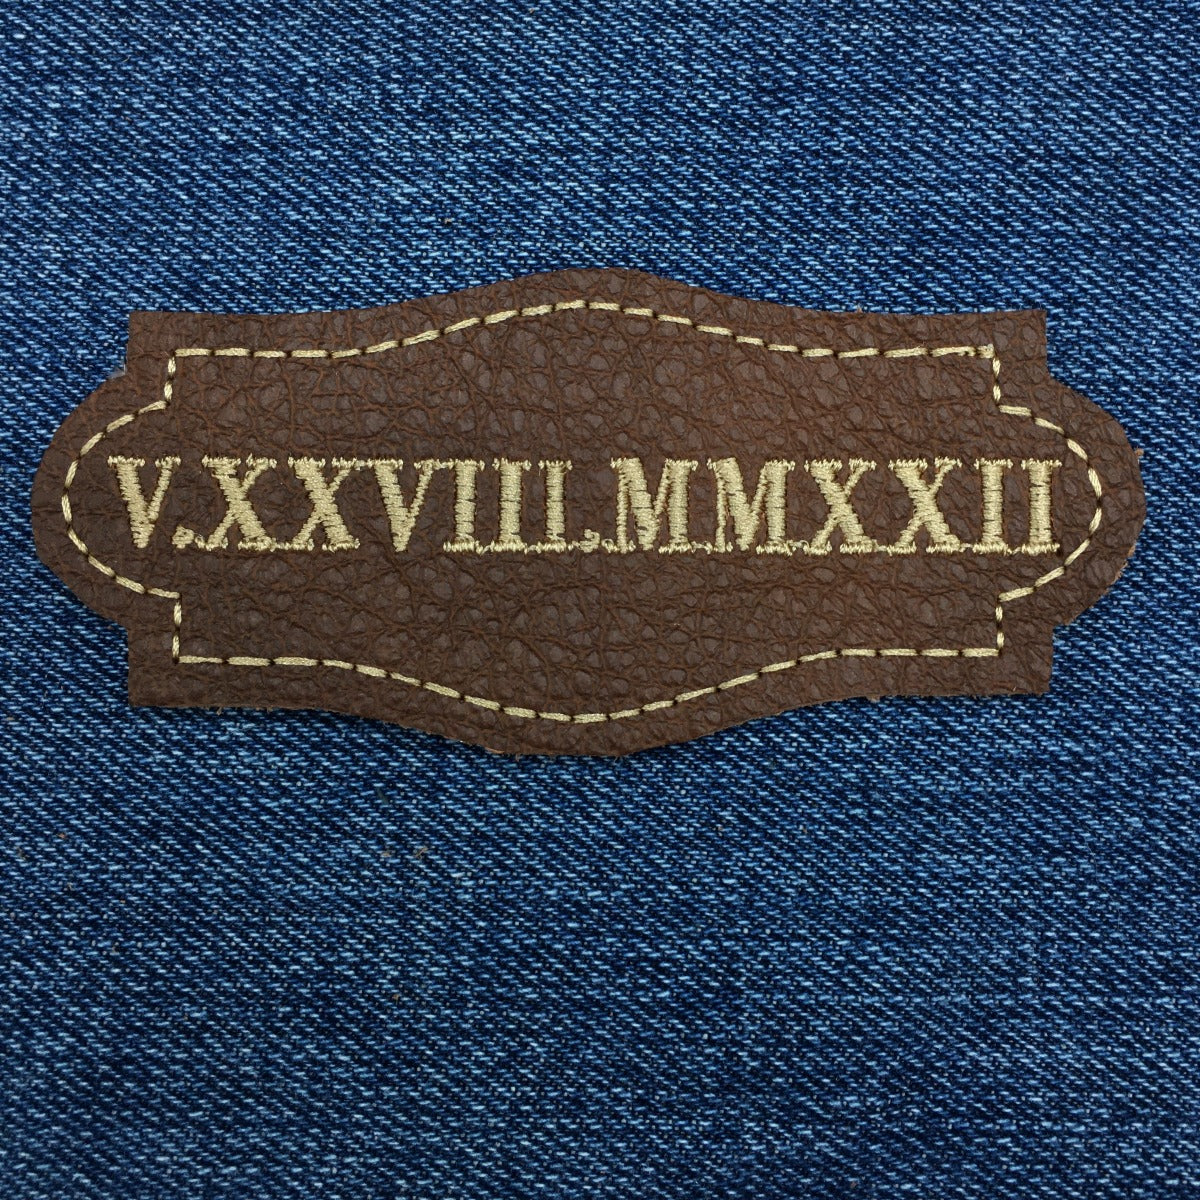 leather roman numeral date patch on denim